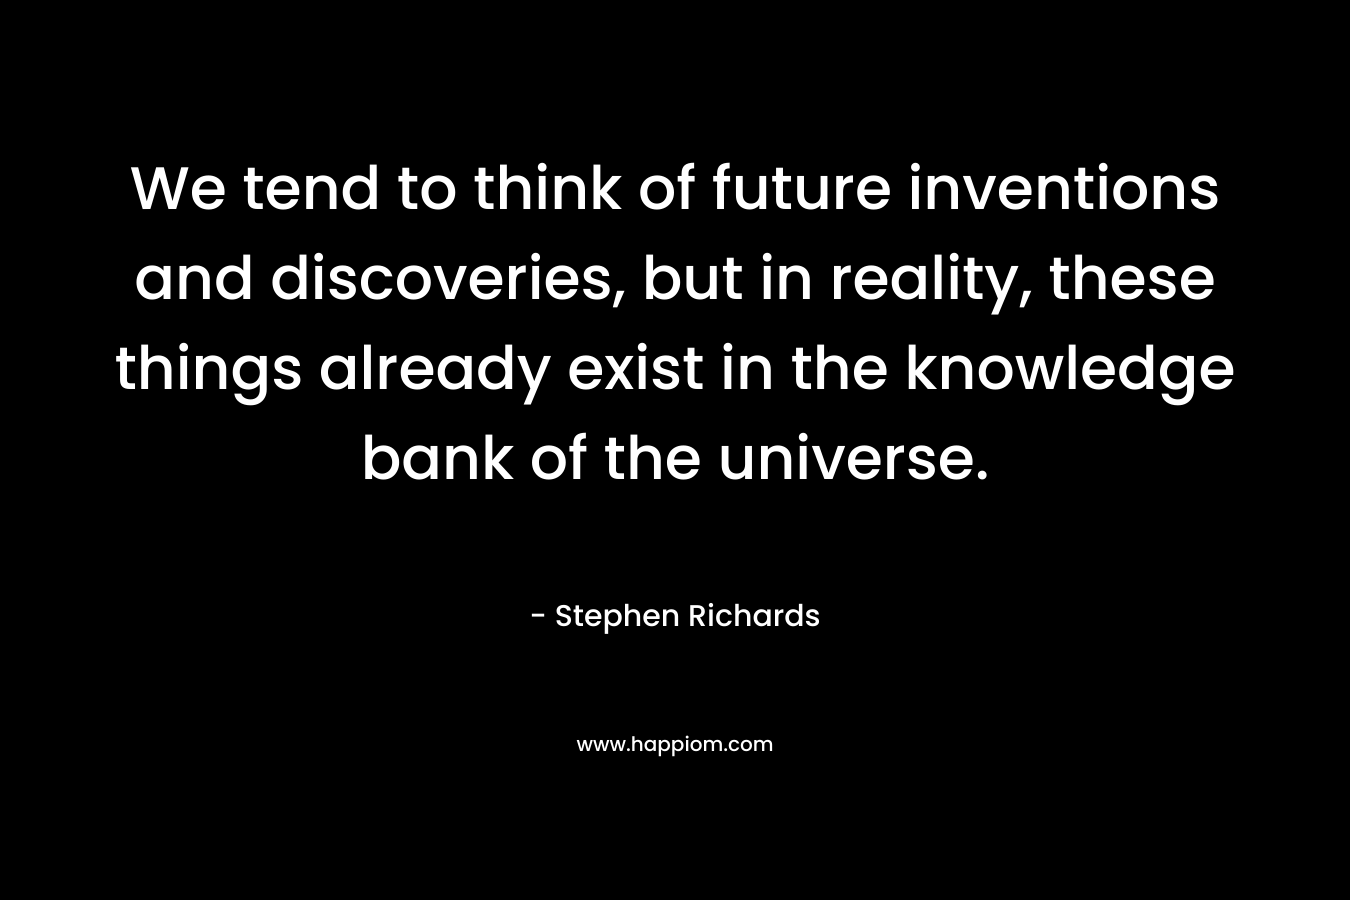 We tend to think of future inventions and discoveries, but in reality, these things already exist in the knowledge bank of the universe.